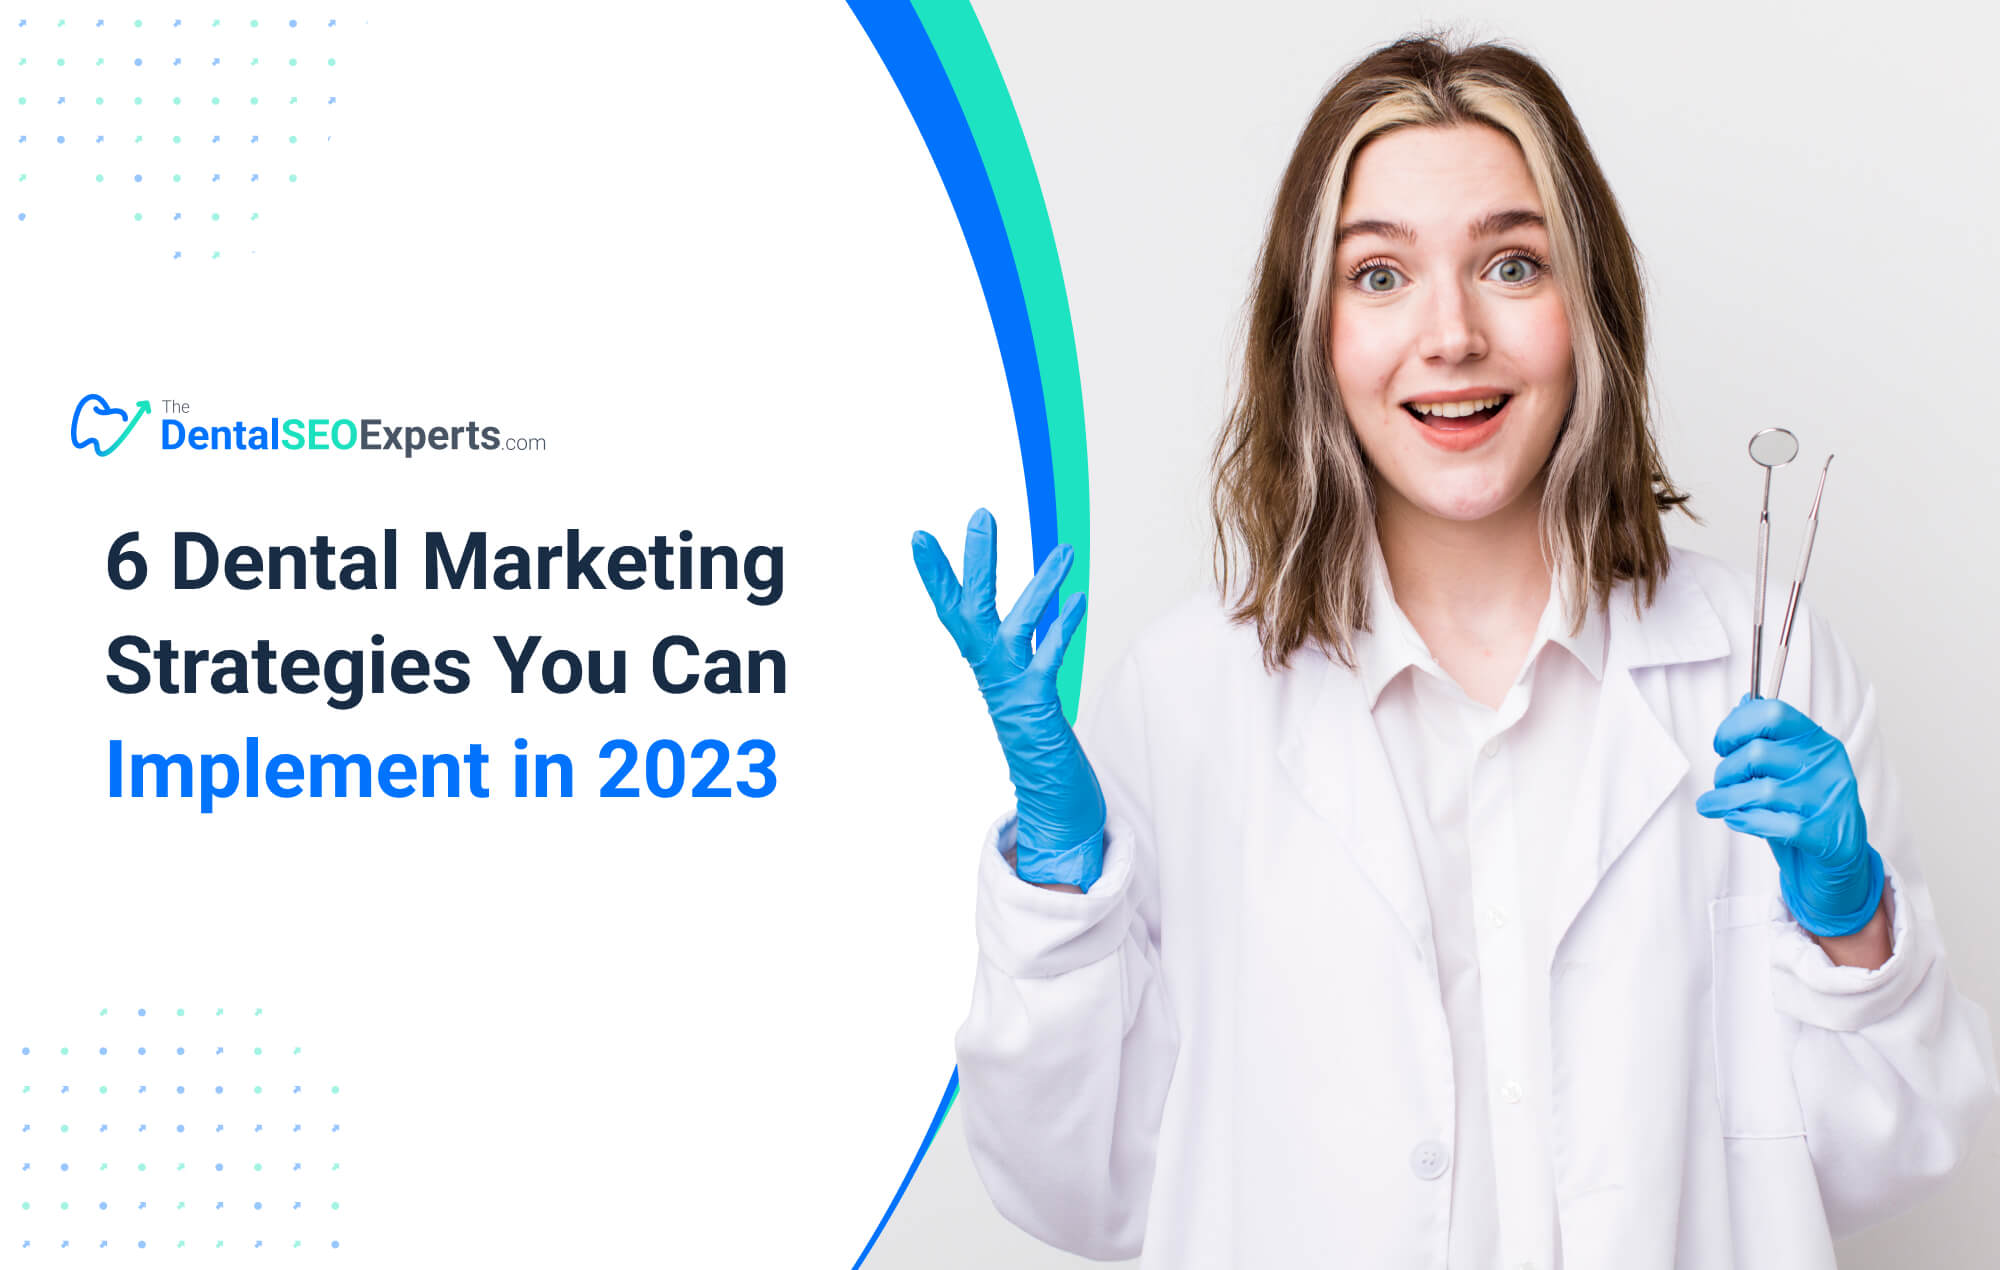 6 Dental Marketing Strategies You Can Implement In 2023